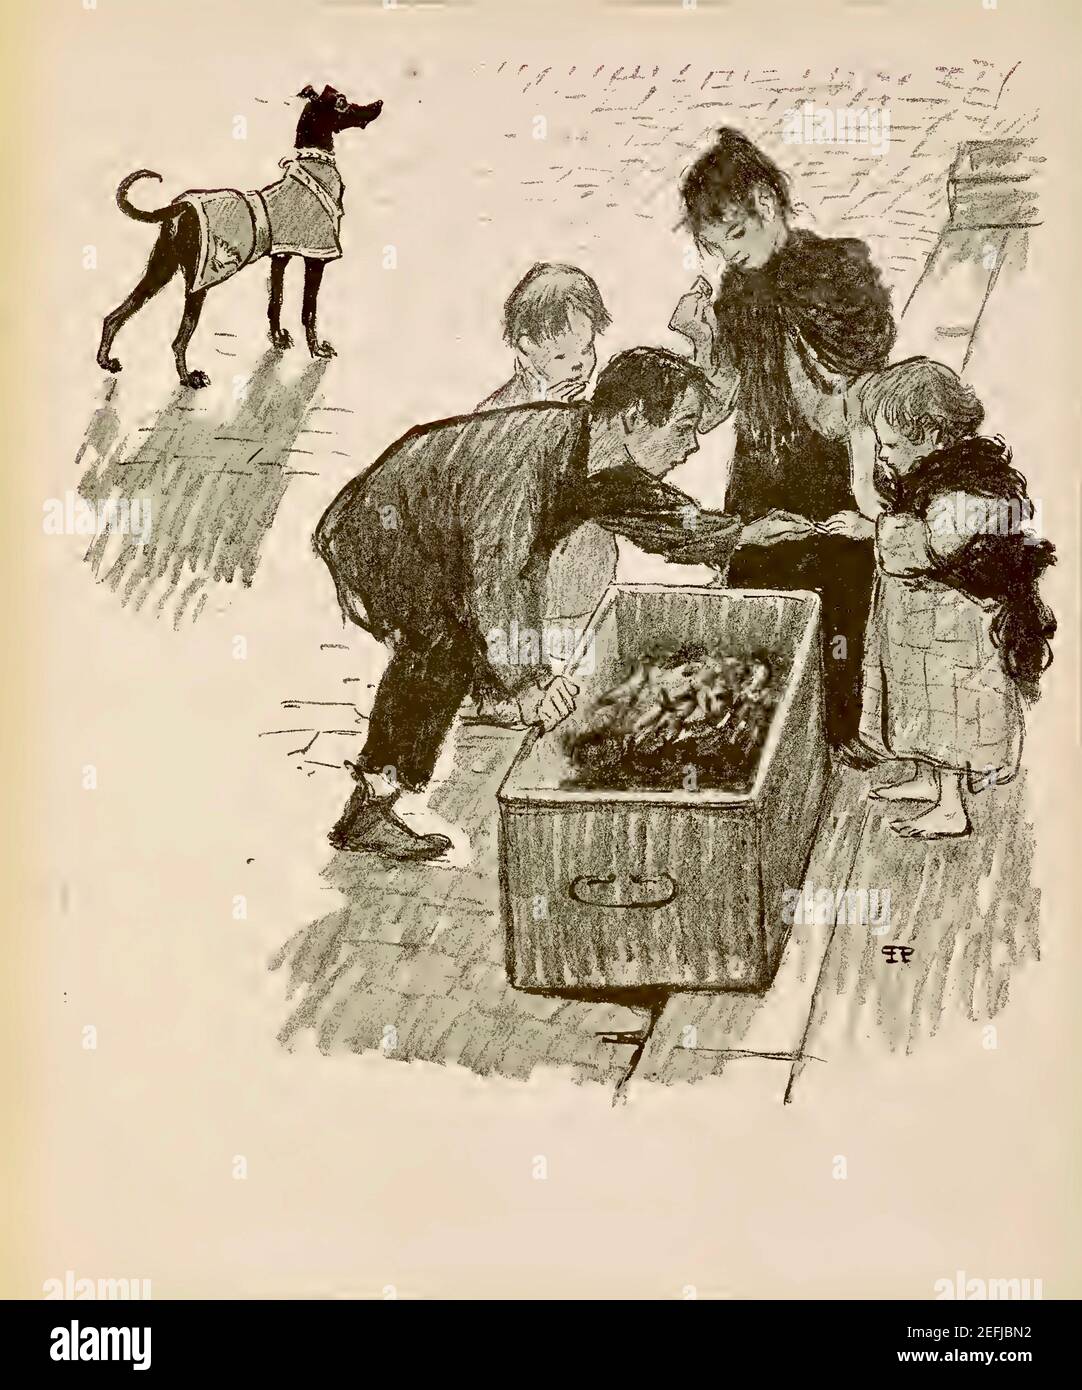 The Children and the Rich Man's Dog highlights the gulf between rich and poor in this noteworthy artwork by Theophile Steinlen. Stock Photo